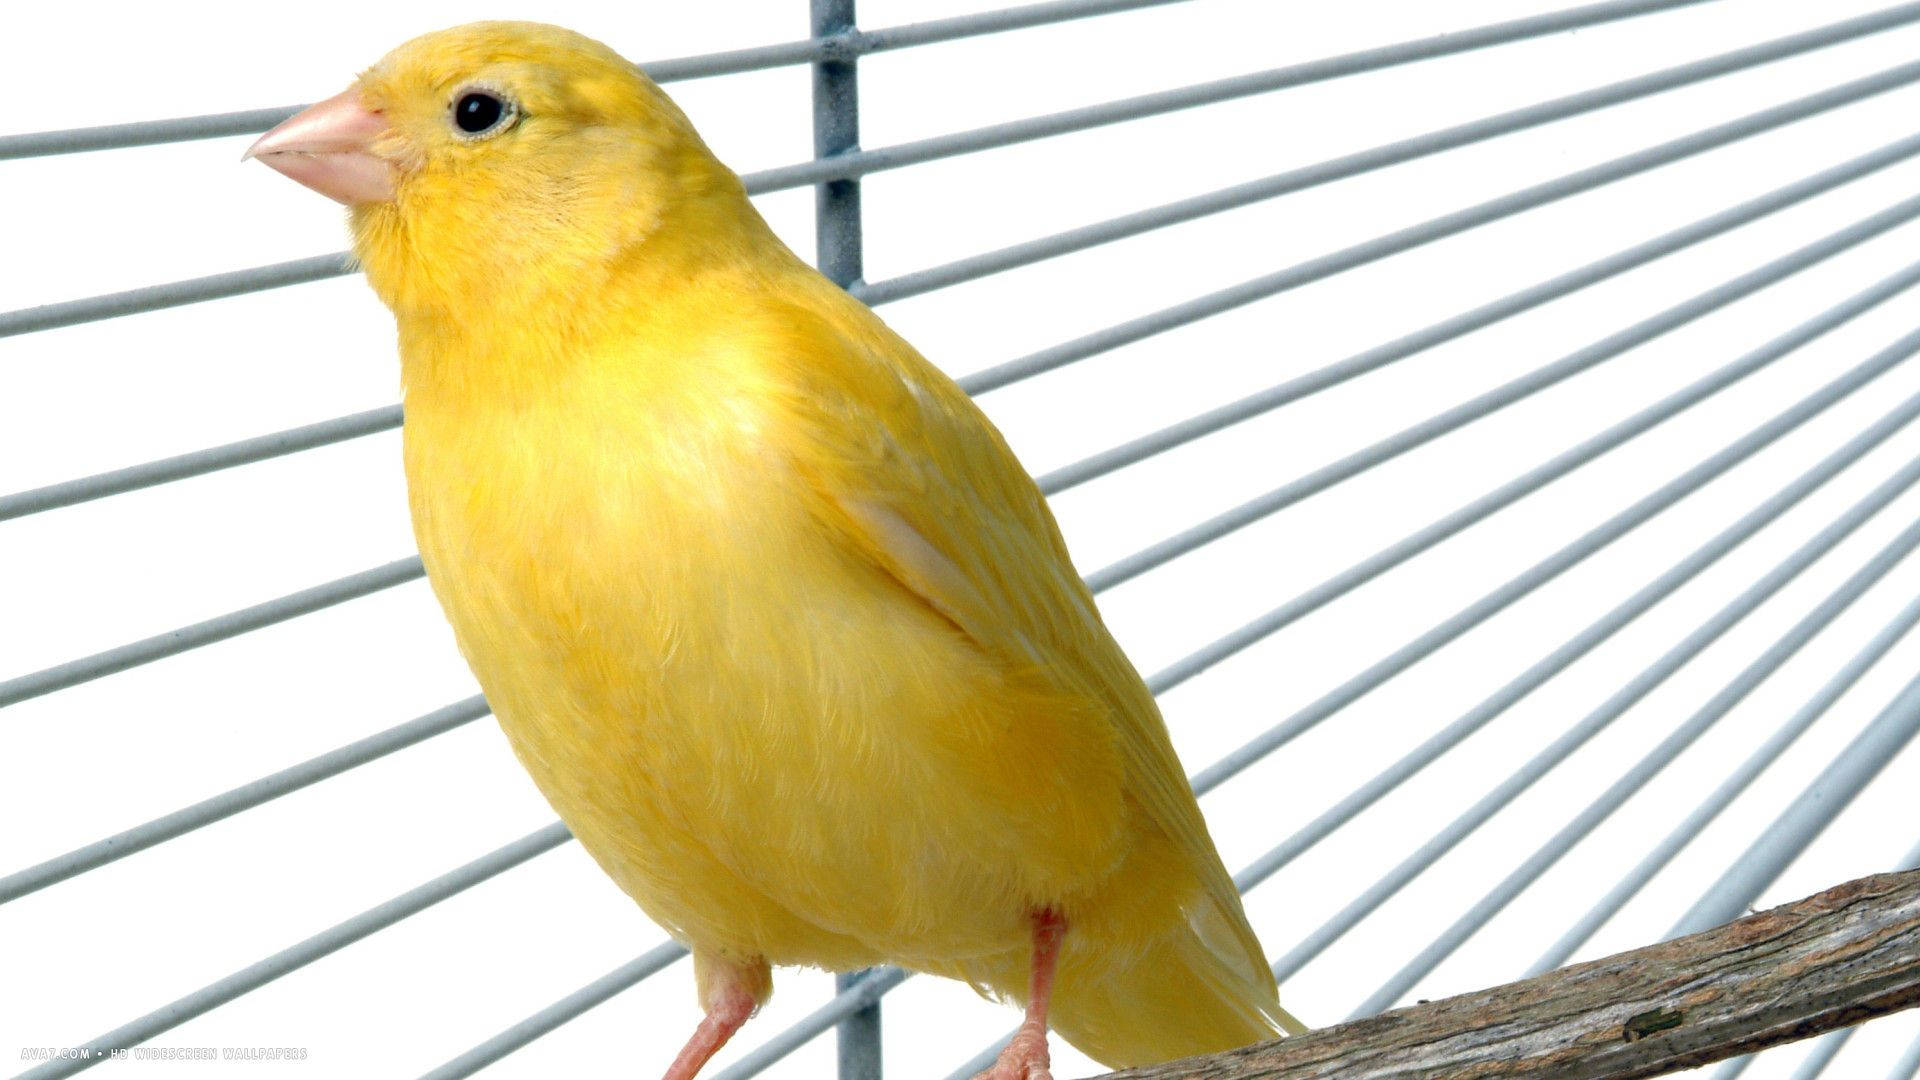 Captivating Yellow Bird Perched Inside a Cage Wallpaper